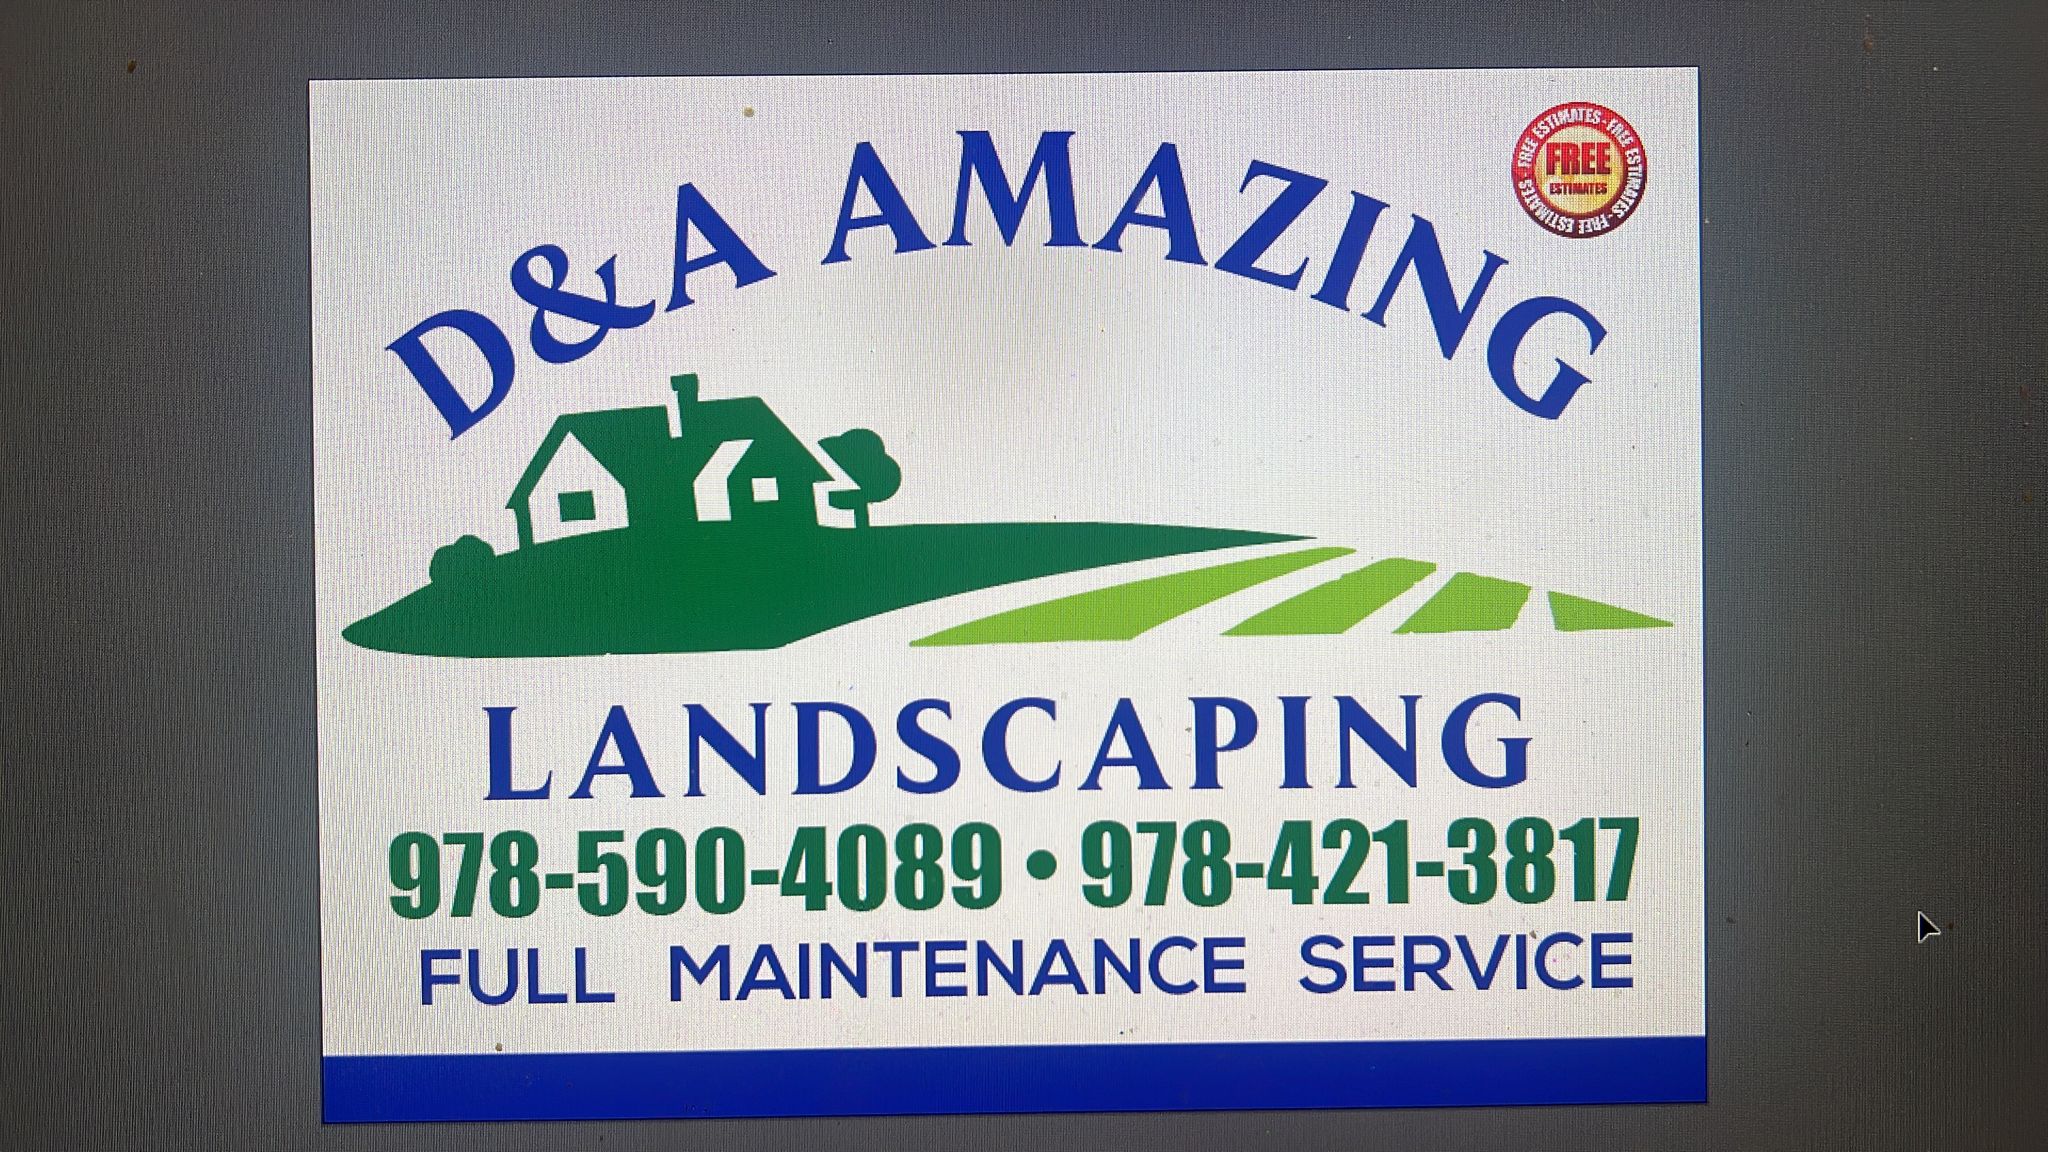 D&A Amazing Landscaping Logo